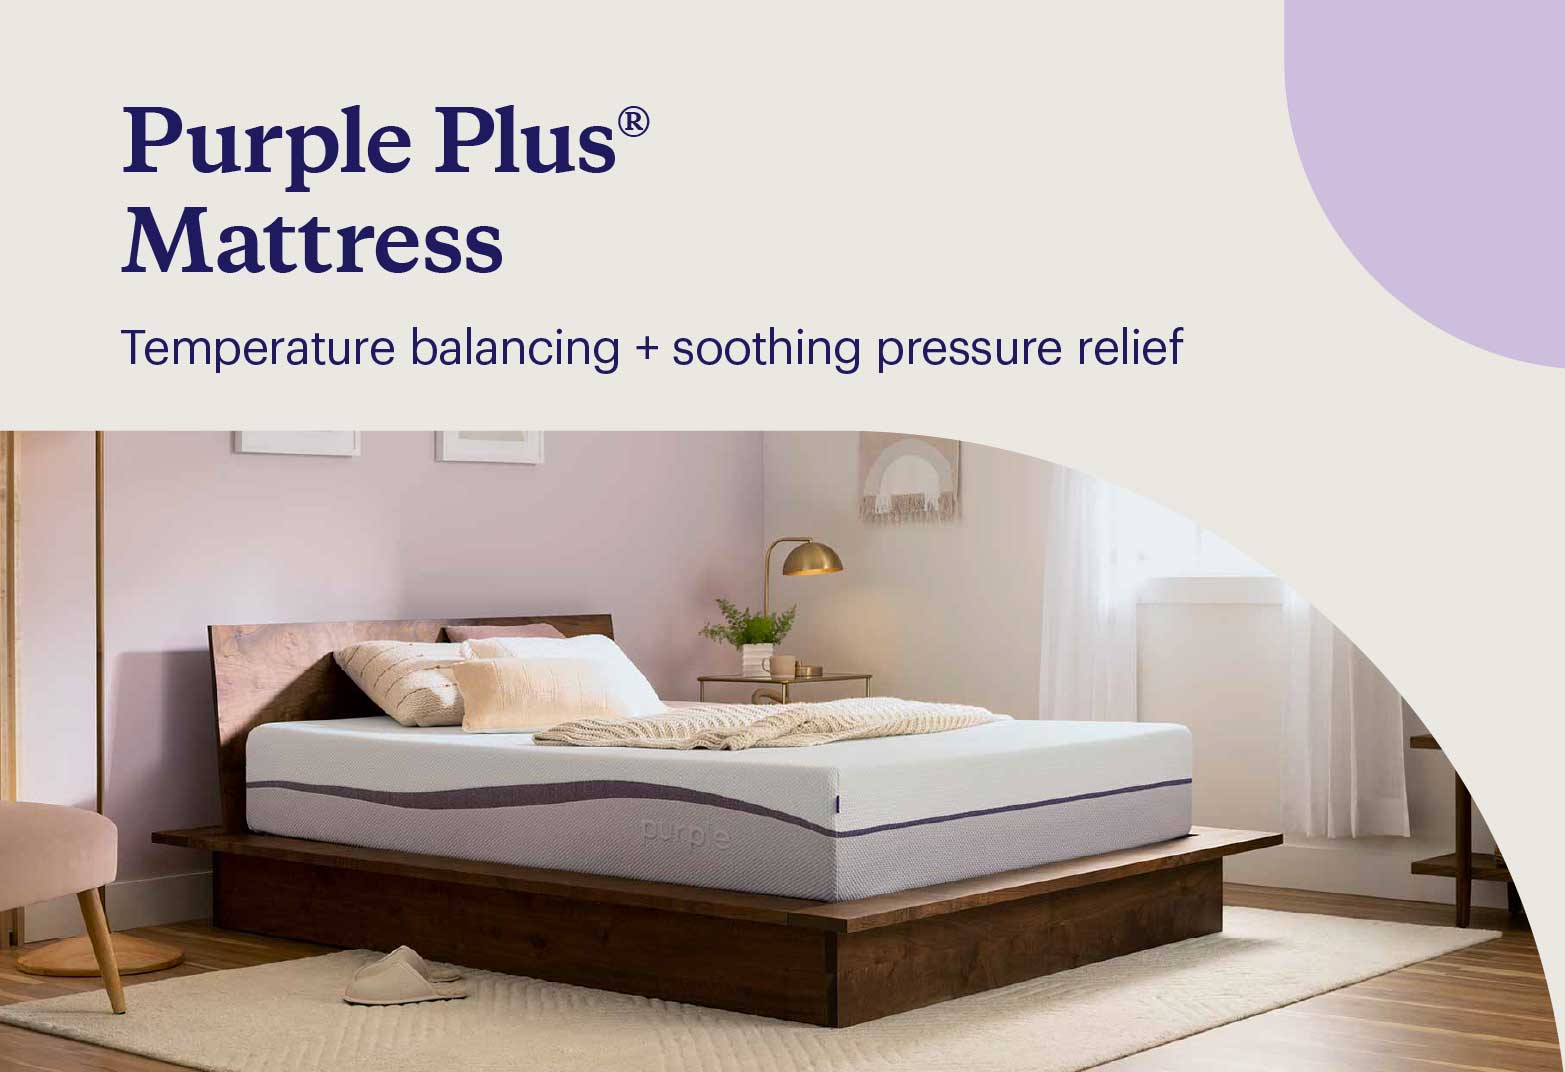 Key features of the Purple plus® mattress shown with the unmade mattress on a modern wood bed frame in a boho bedroom.